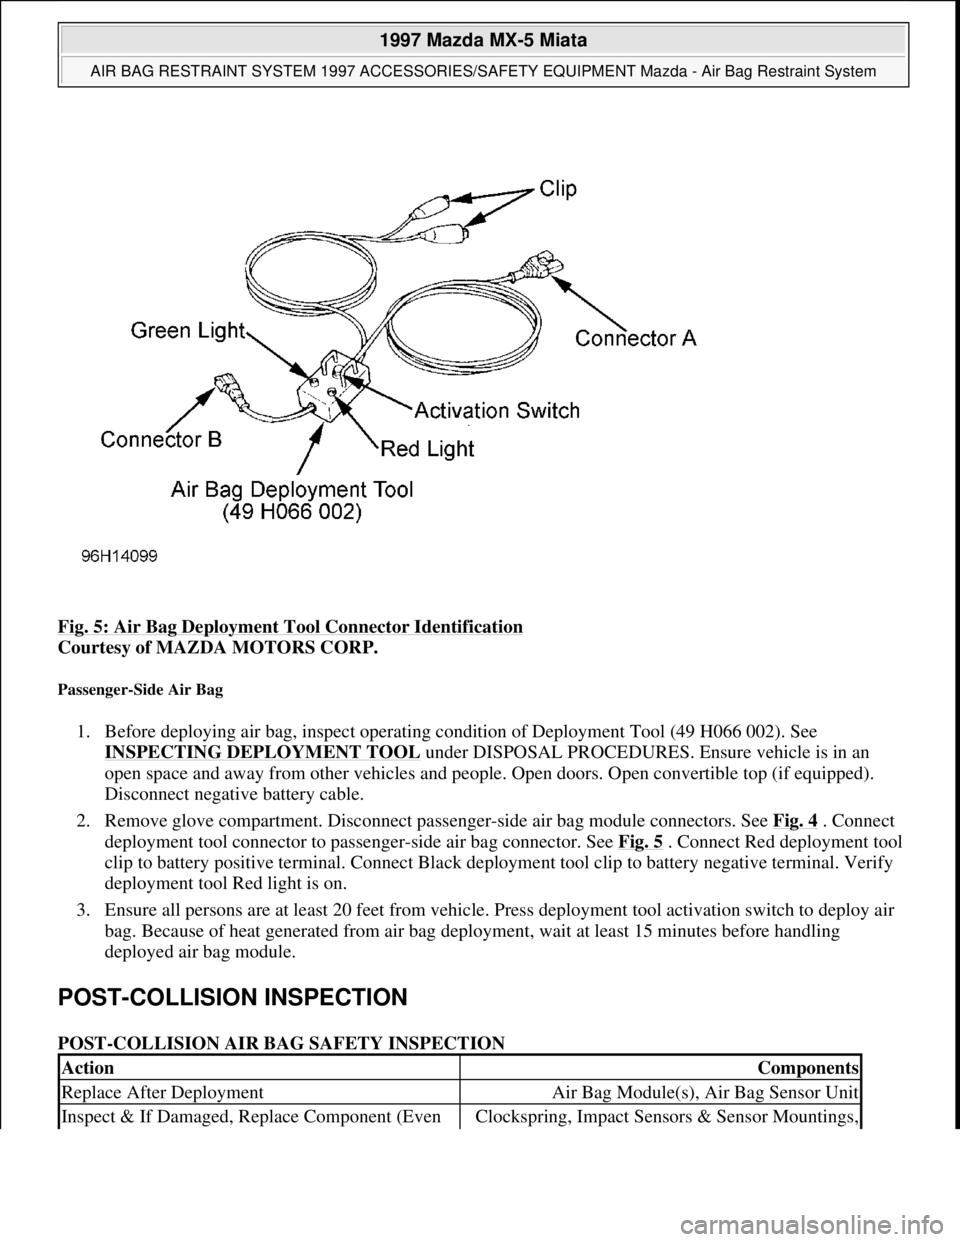 MAZDA MX-5 1997  Factory Repair Manual Fig. 5: Air Bag Deployment Tool Connector Identification 
Courtesy of MAZDA MOTORS CORP.  
Passenger-Side Air Bag 
1. Before deploying air bag, inspect operating condition of Deployment Tool (49 H066 